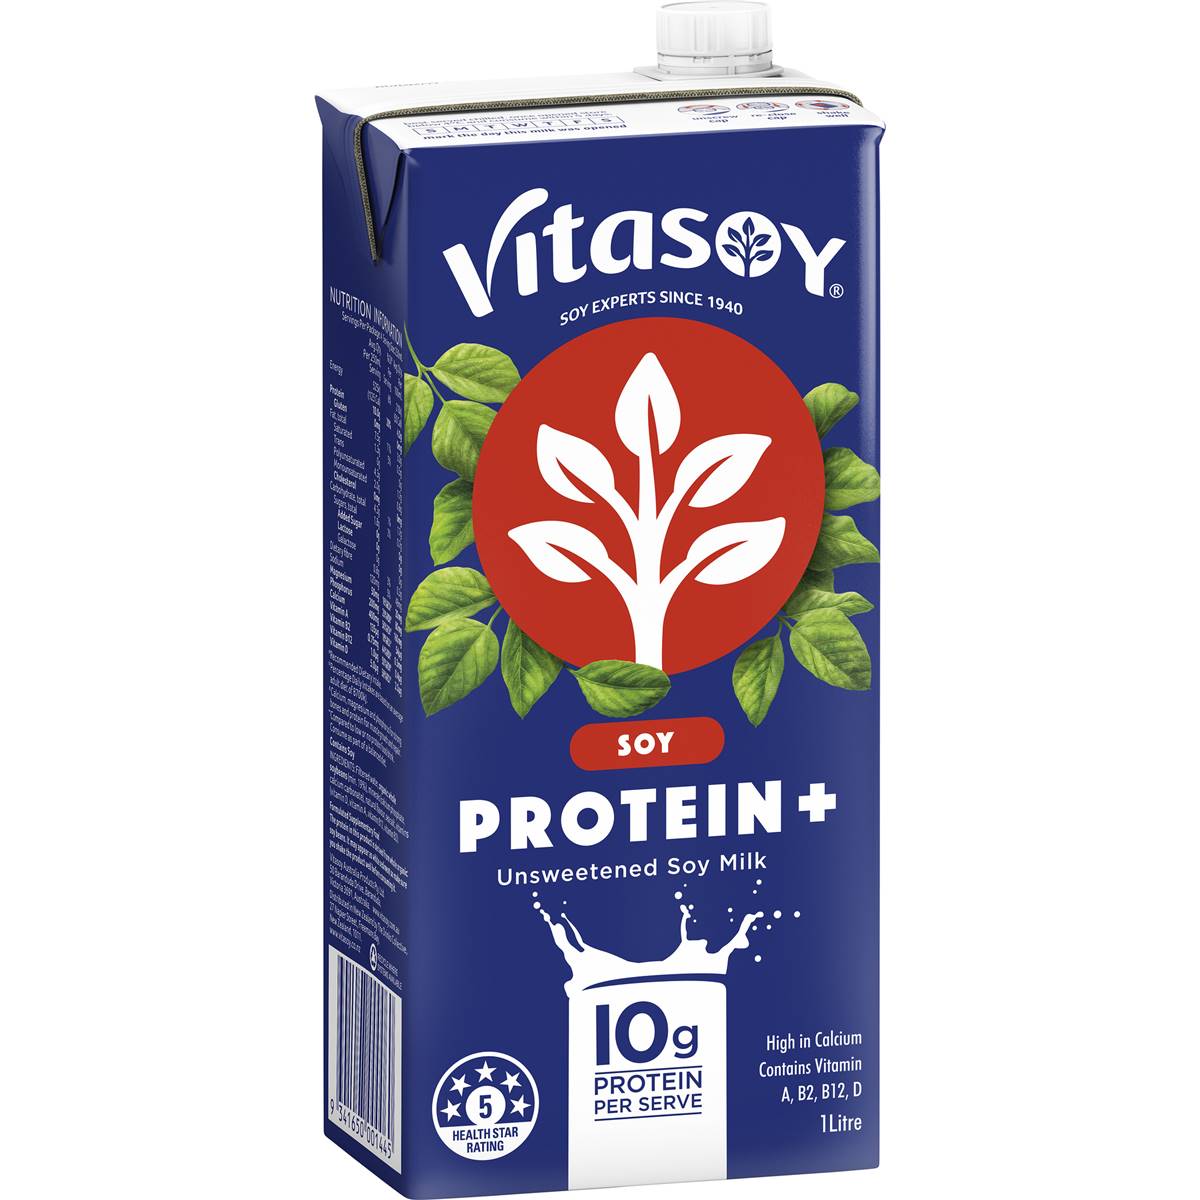 Calories in Vitasoy Soy & Protein Unsweetened Milk